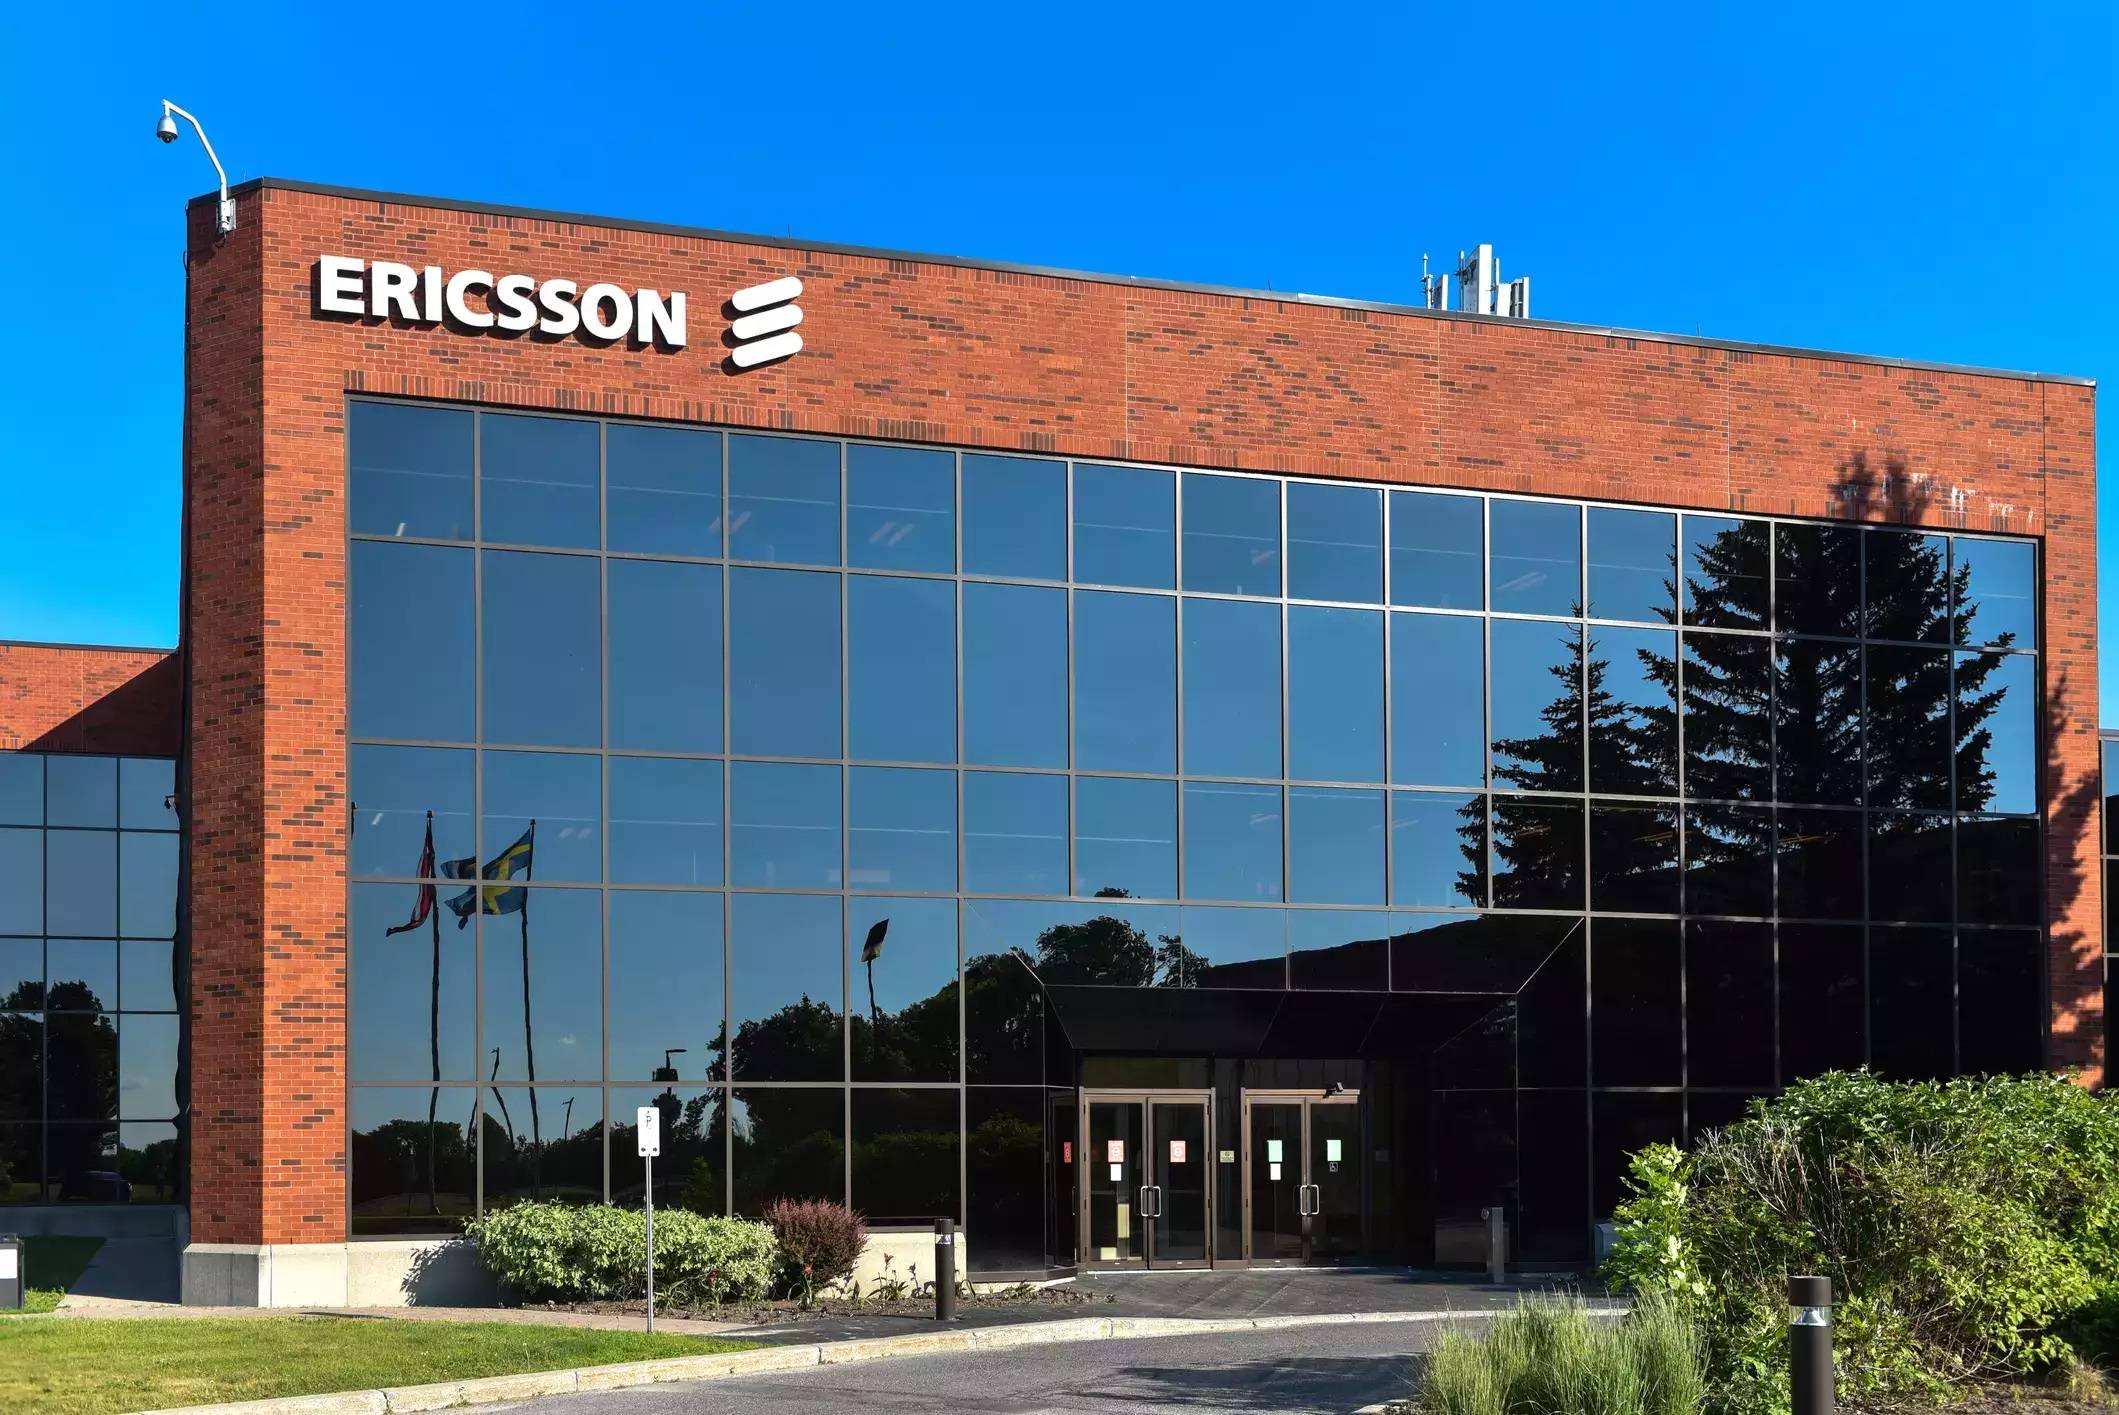 Ericsson in talks to pick up over 5 lakh sq ft workspace on lease from Skootr in Gurgaon